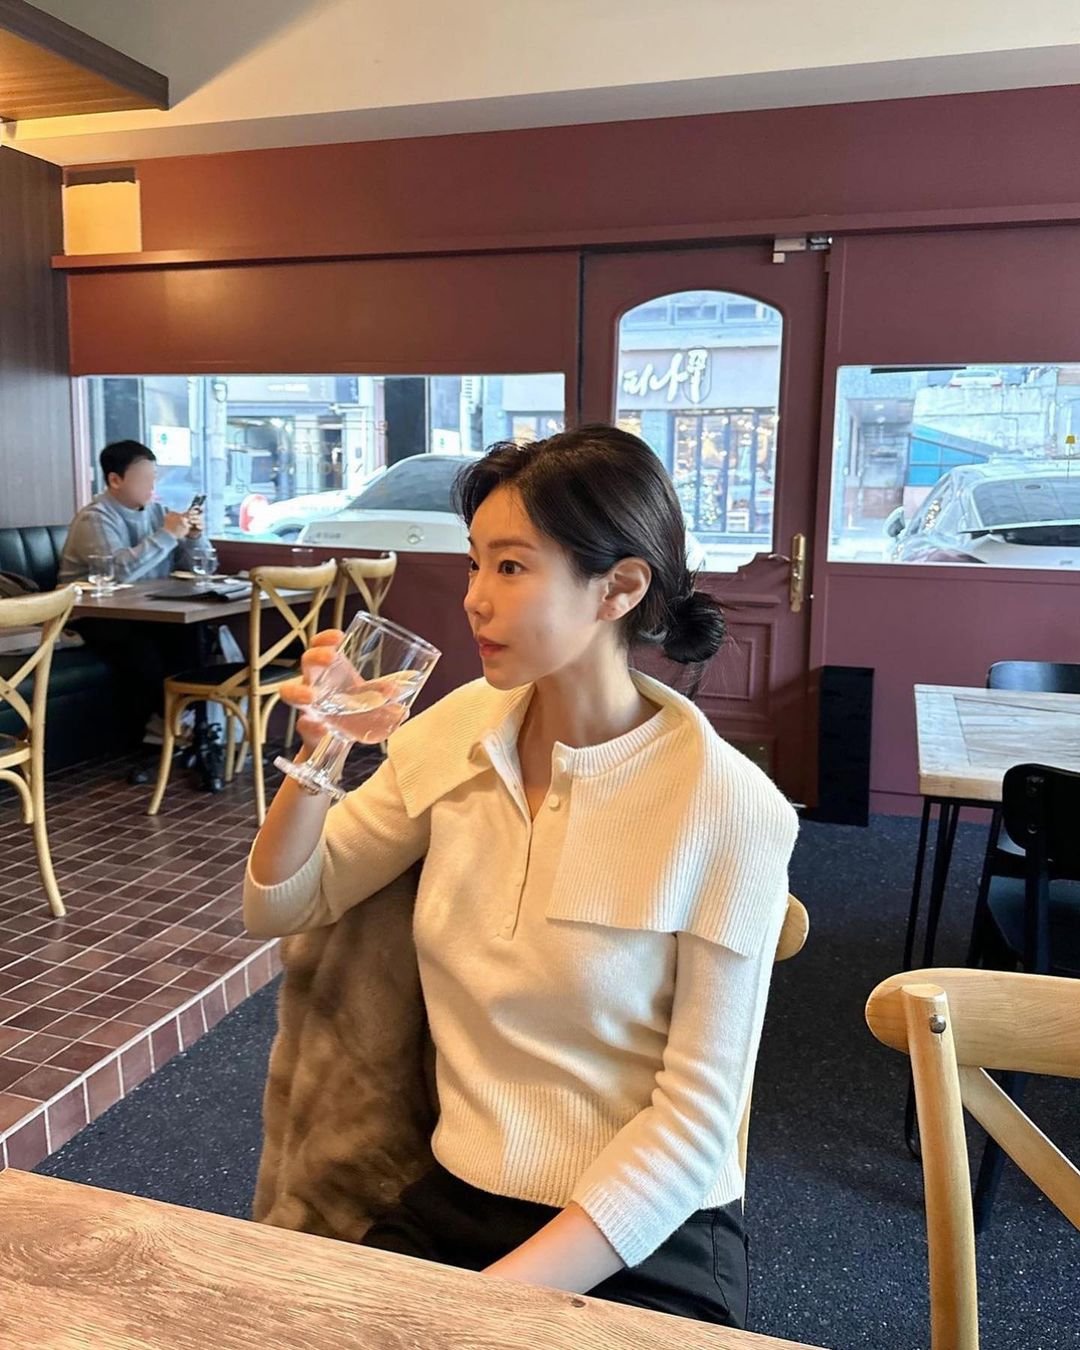 My name is Belle. I am 32 years old. Nice to meet you. I am from Taiwan and now I am in Seoul.    https://t.co/Tr0bsWT0RM